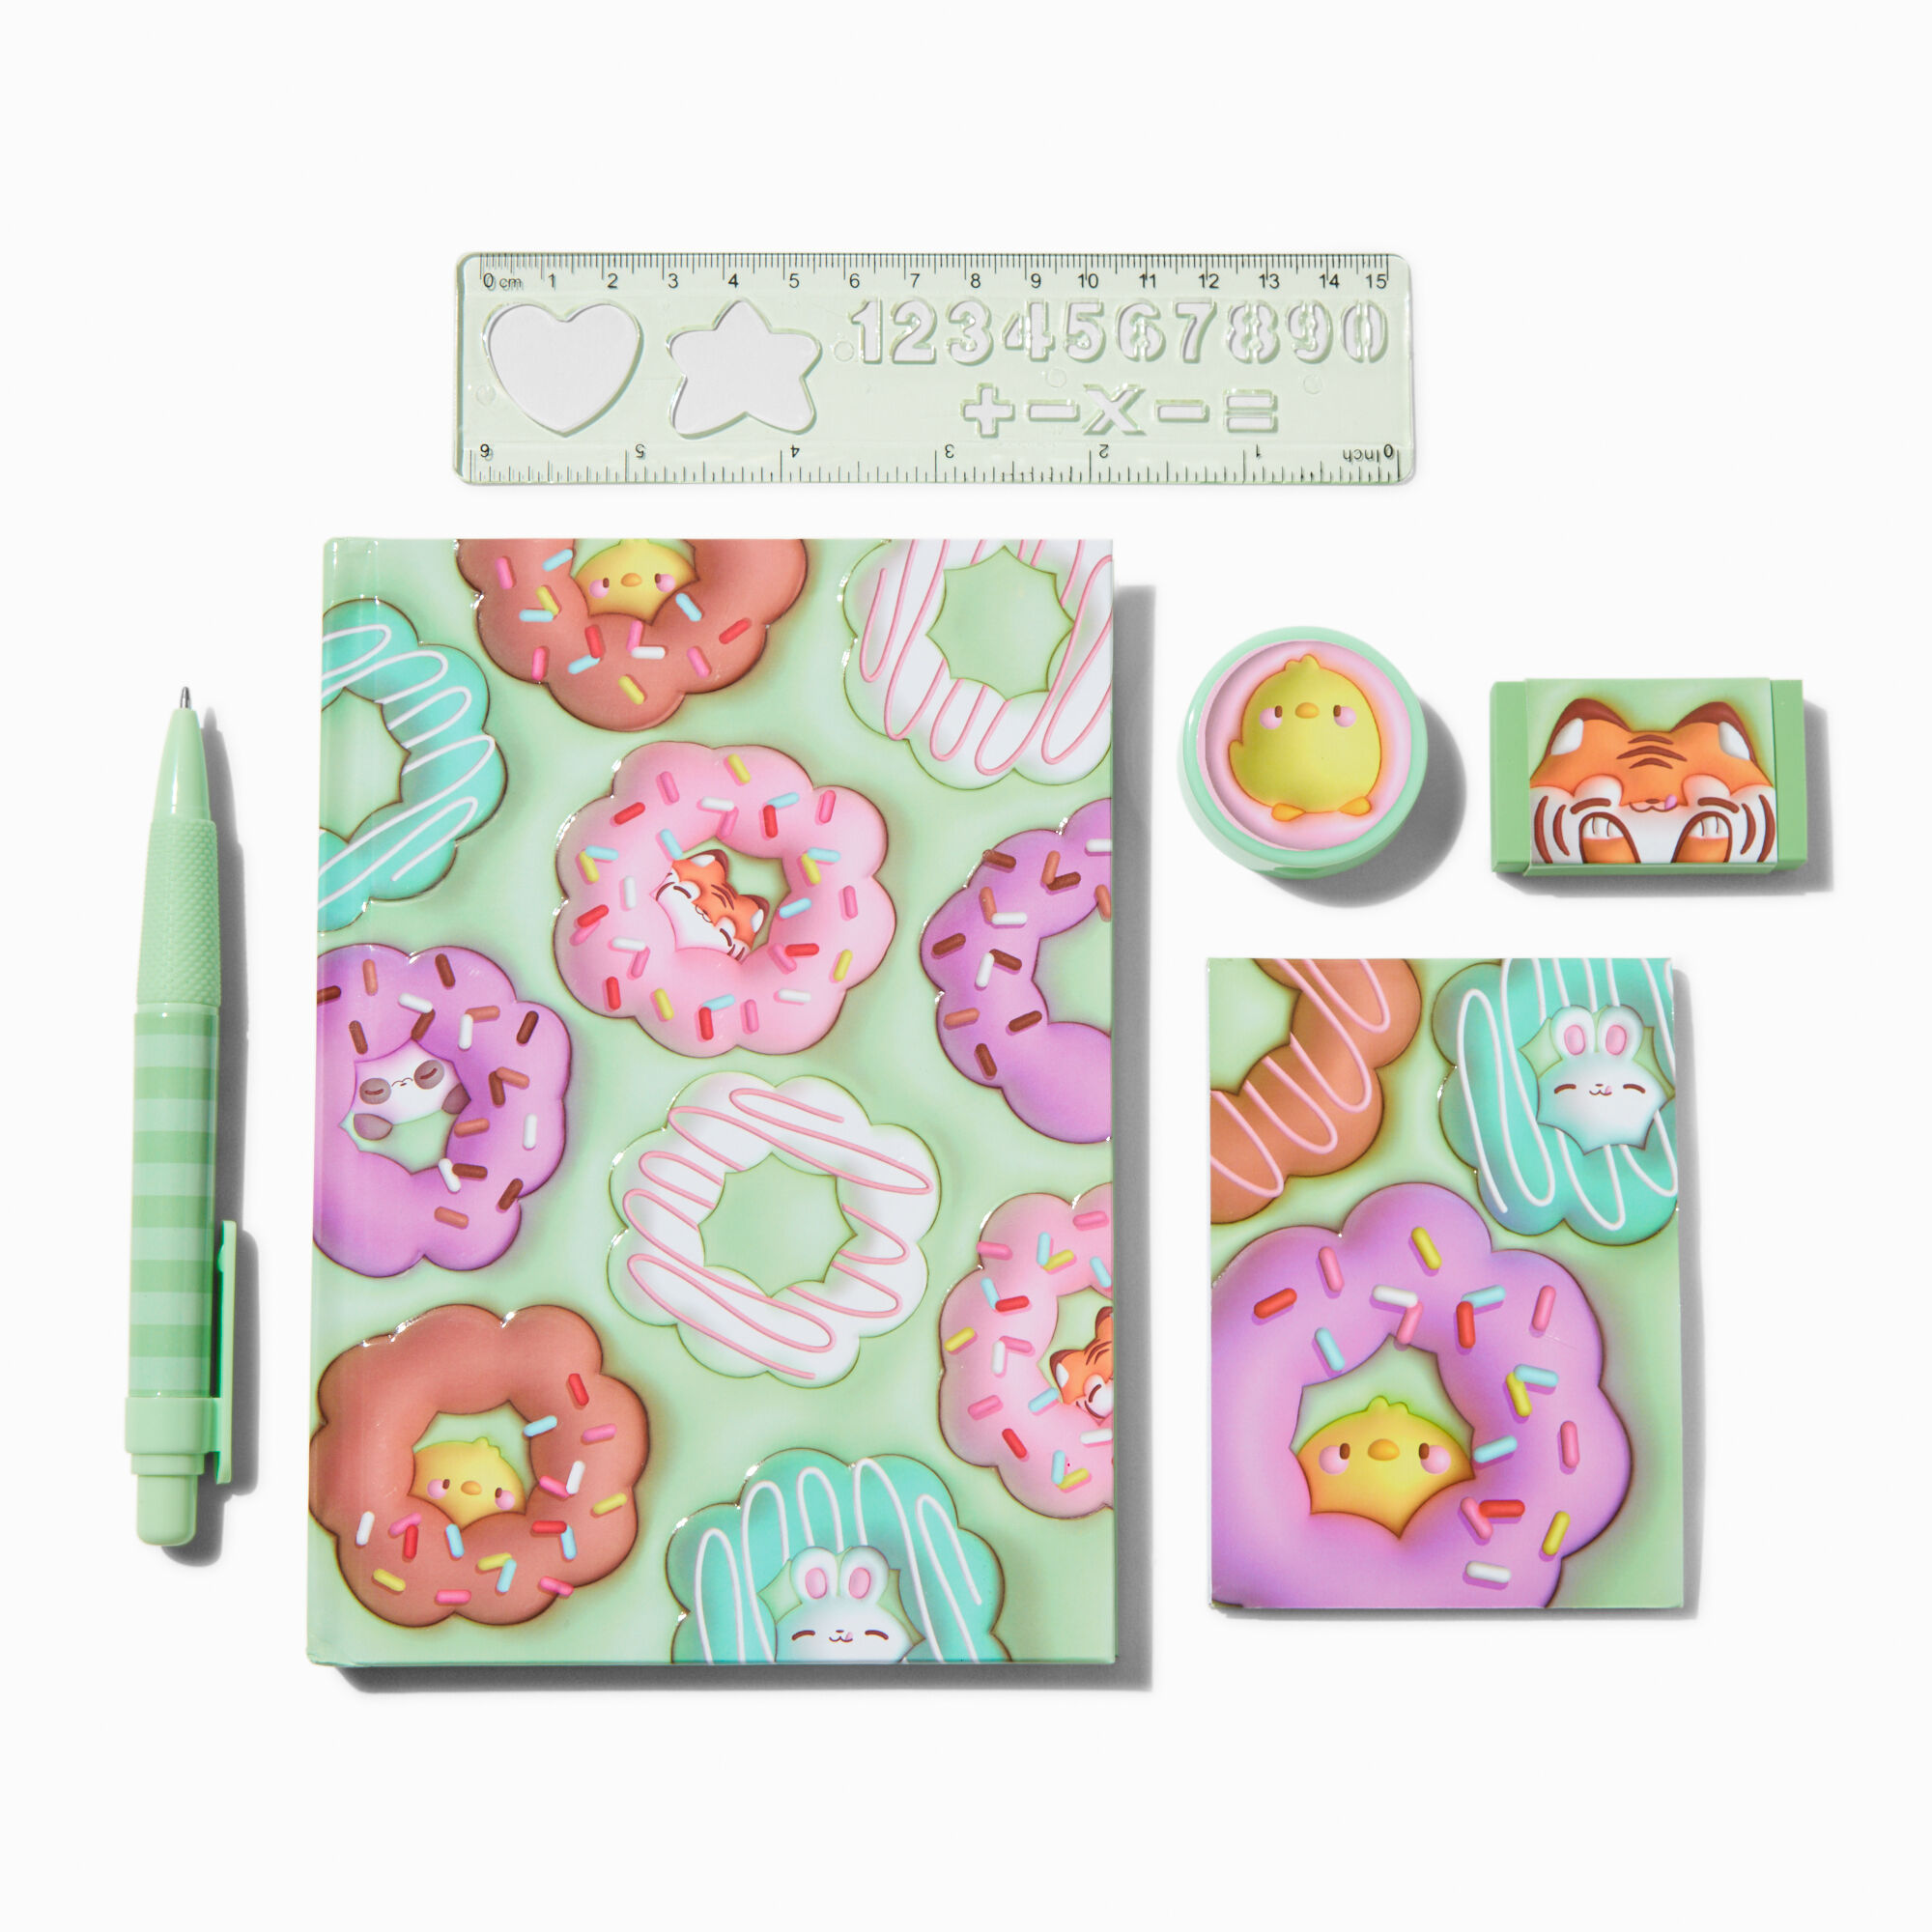 View Claires Mochi Donut Stationery Set information